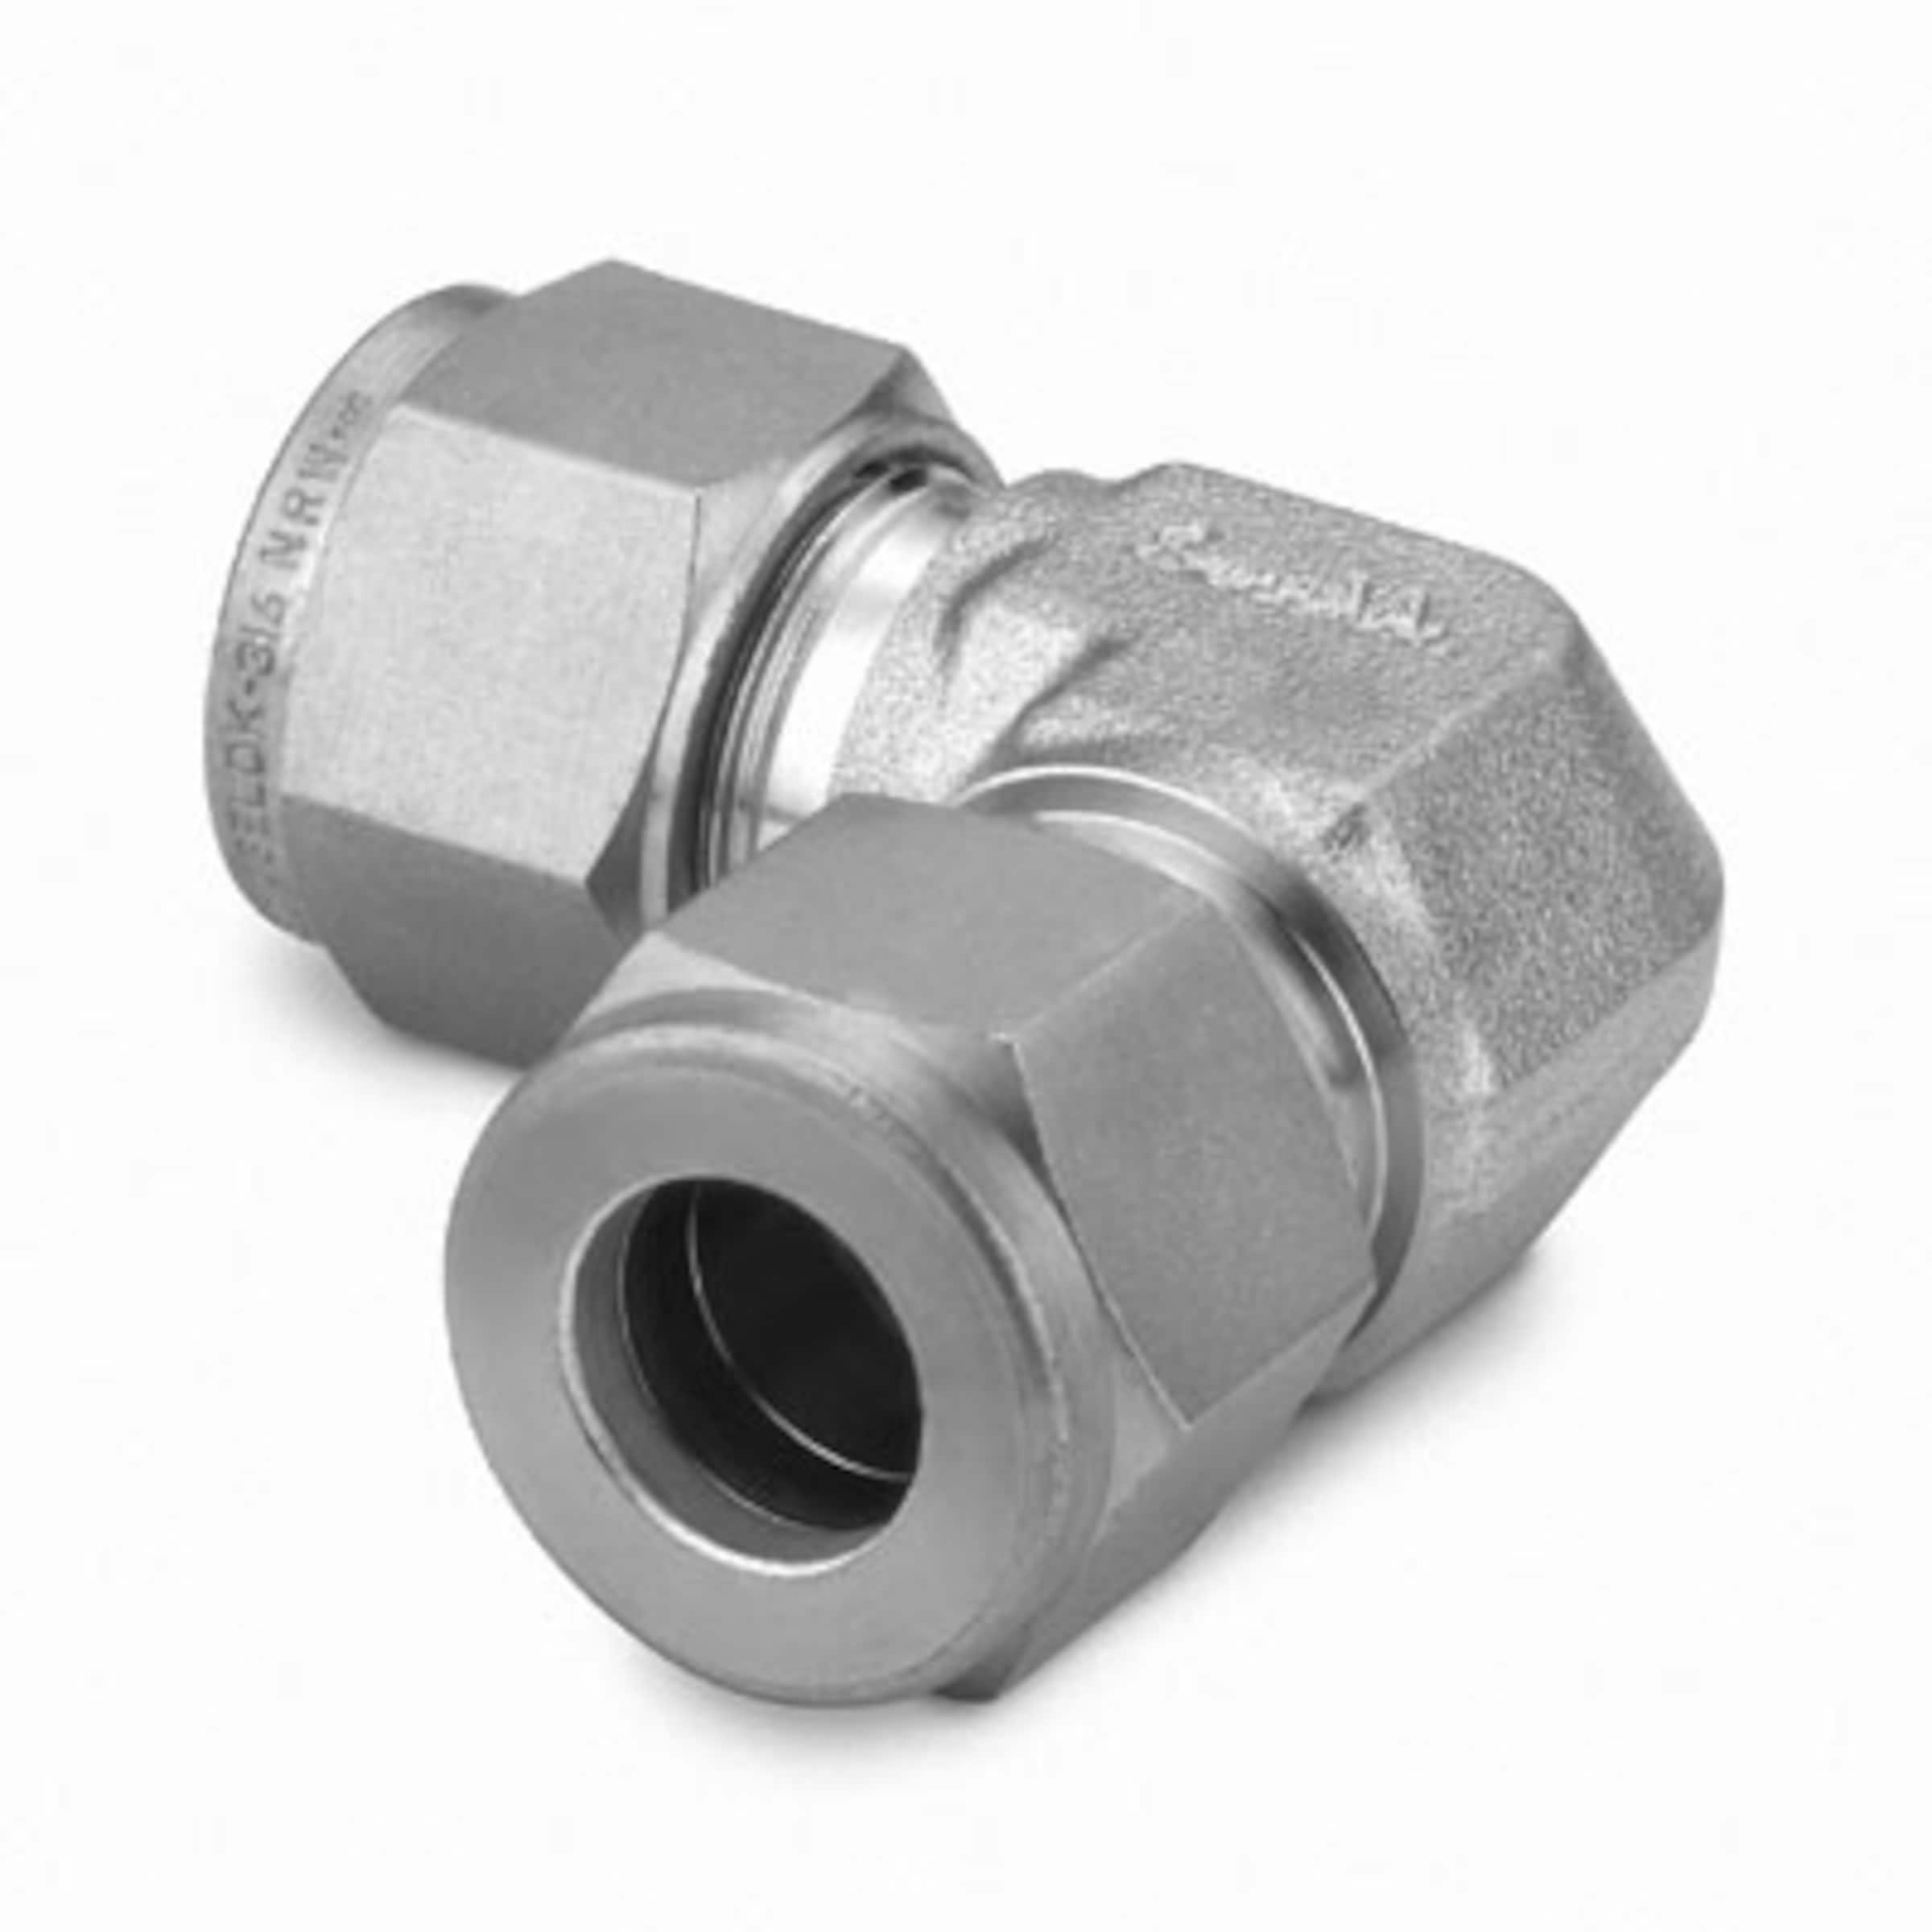 10mm Tube 316L Stainless Steel Pneumatic Fitting Union Elbow